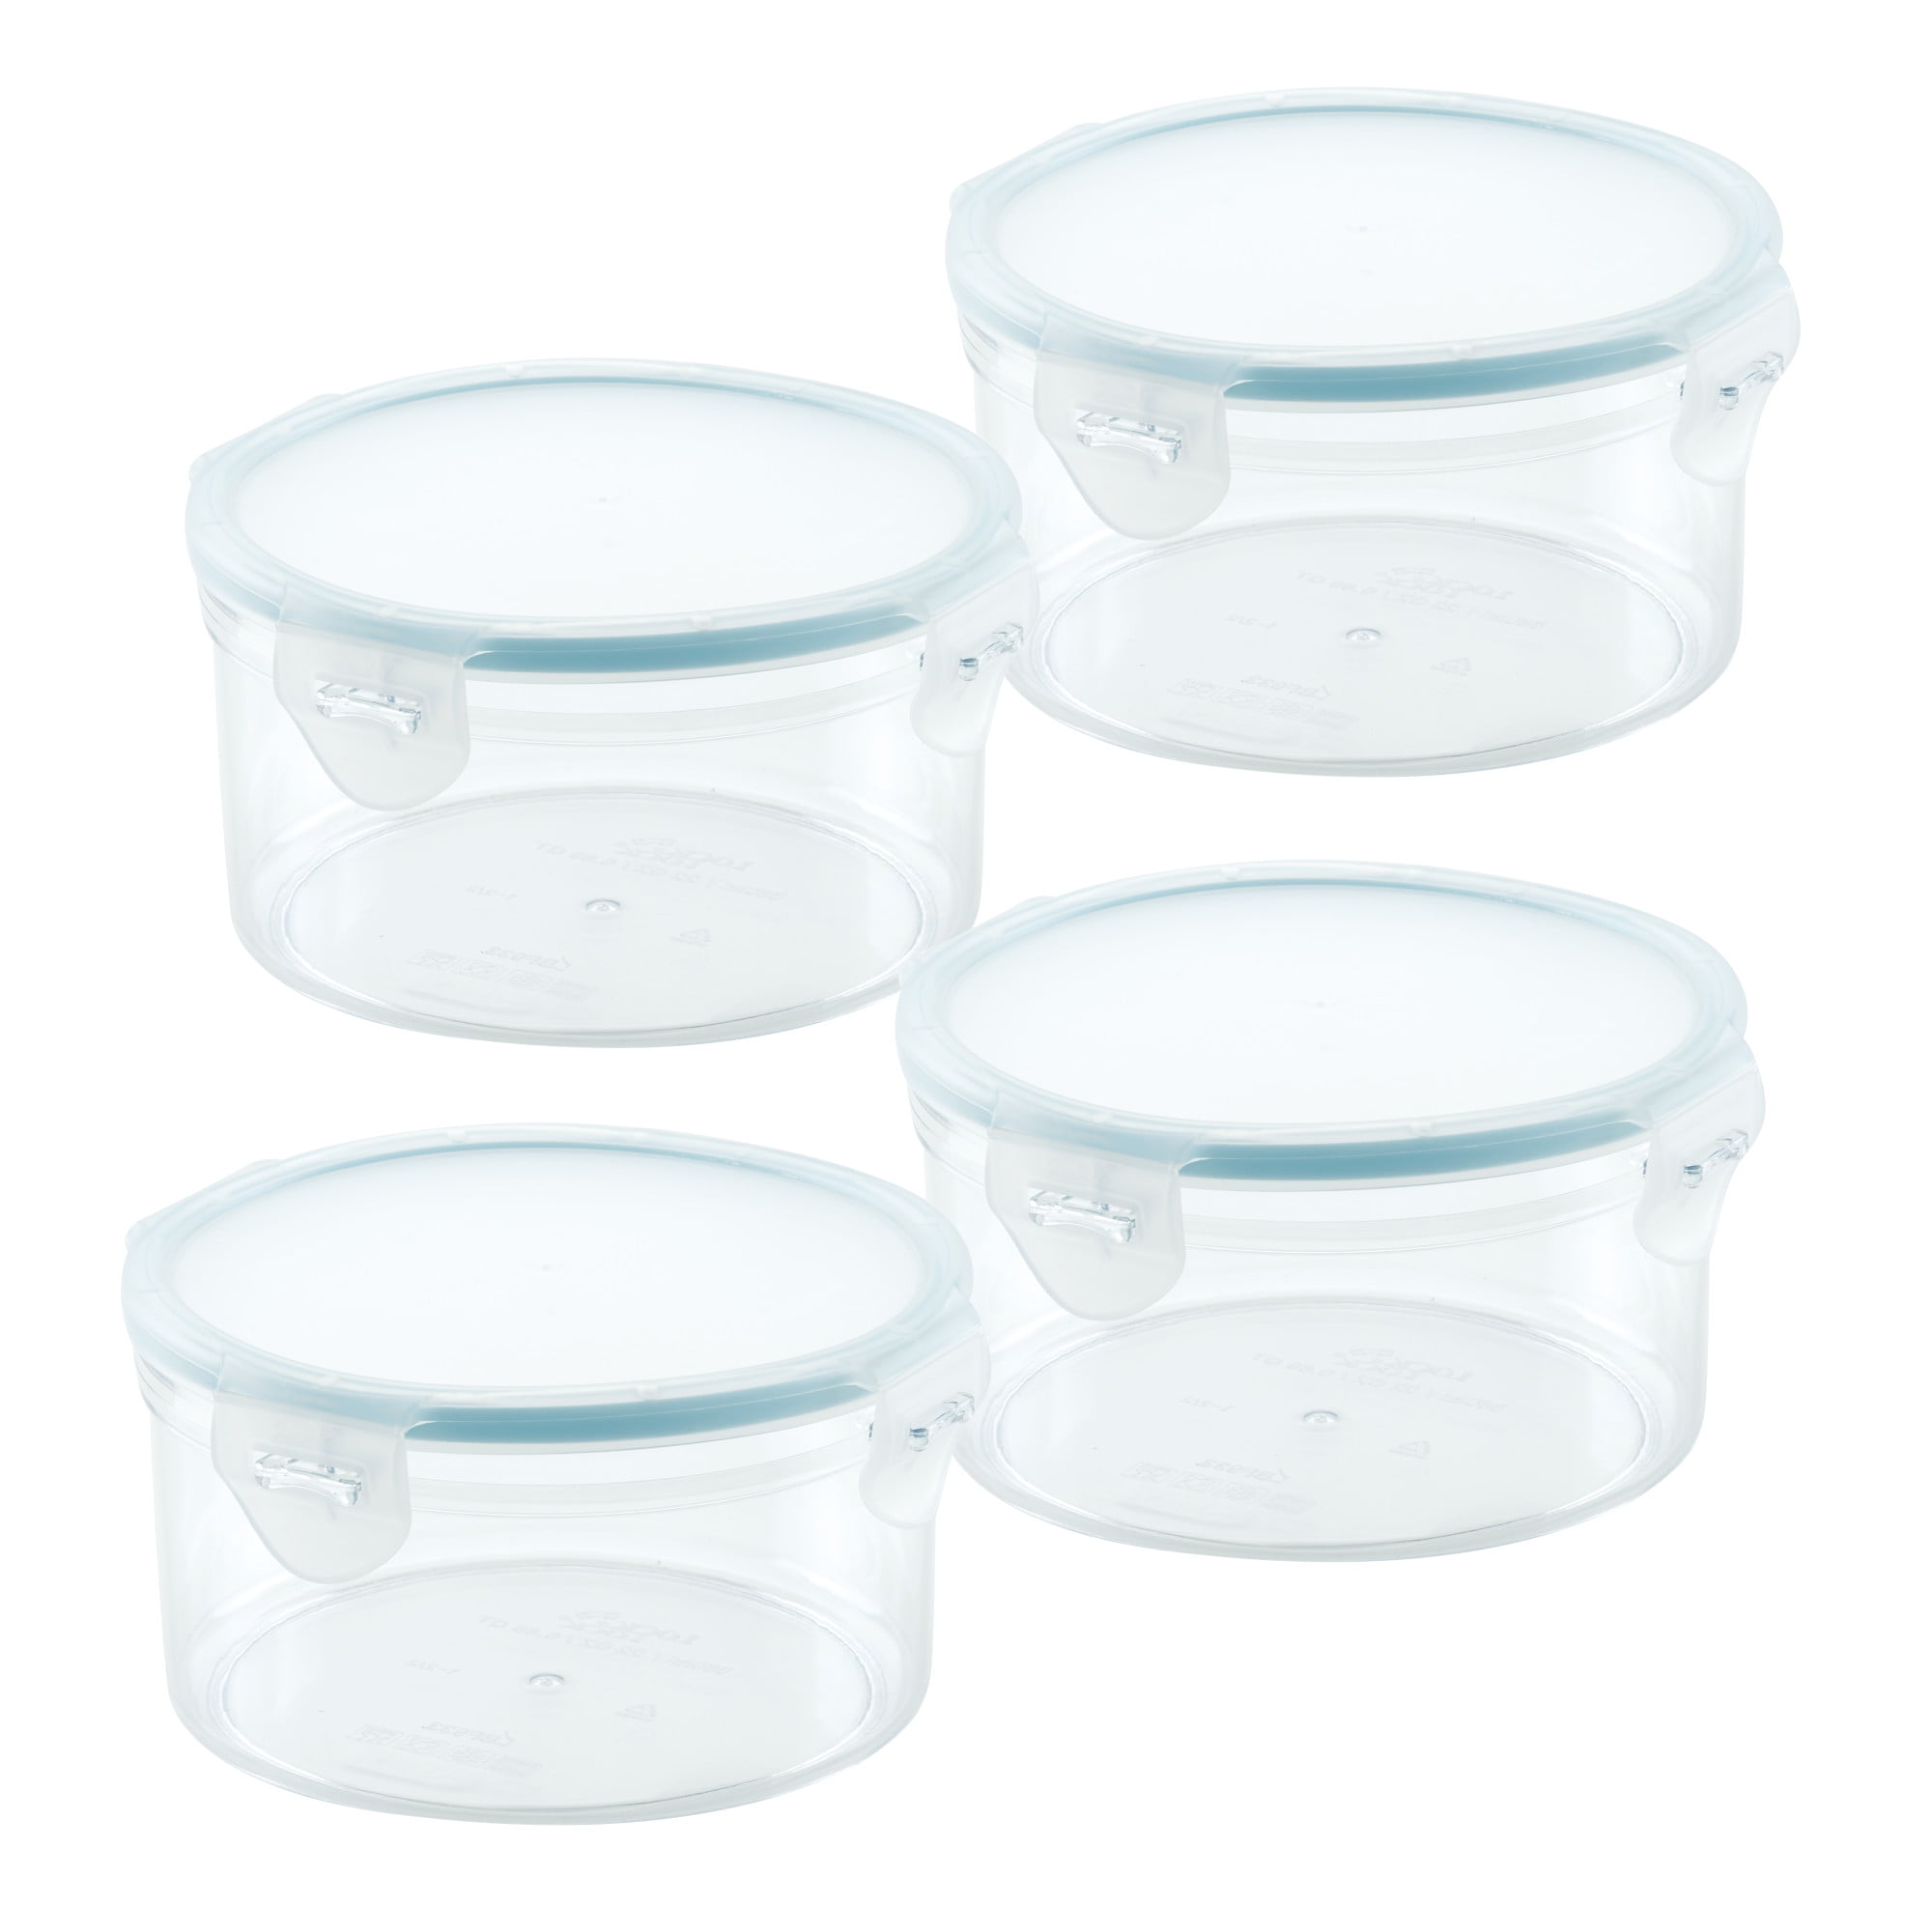 LocknLock Purely Better Food Storage Containers 37oz 4 PC Set